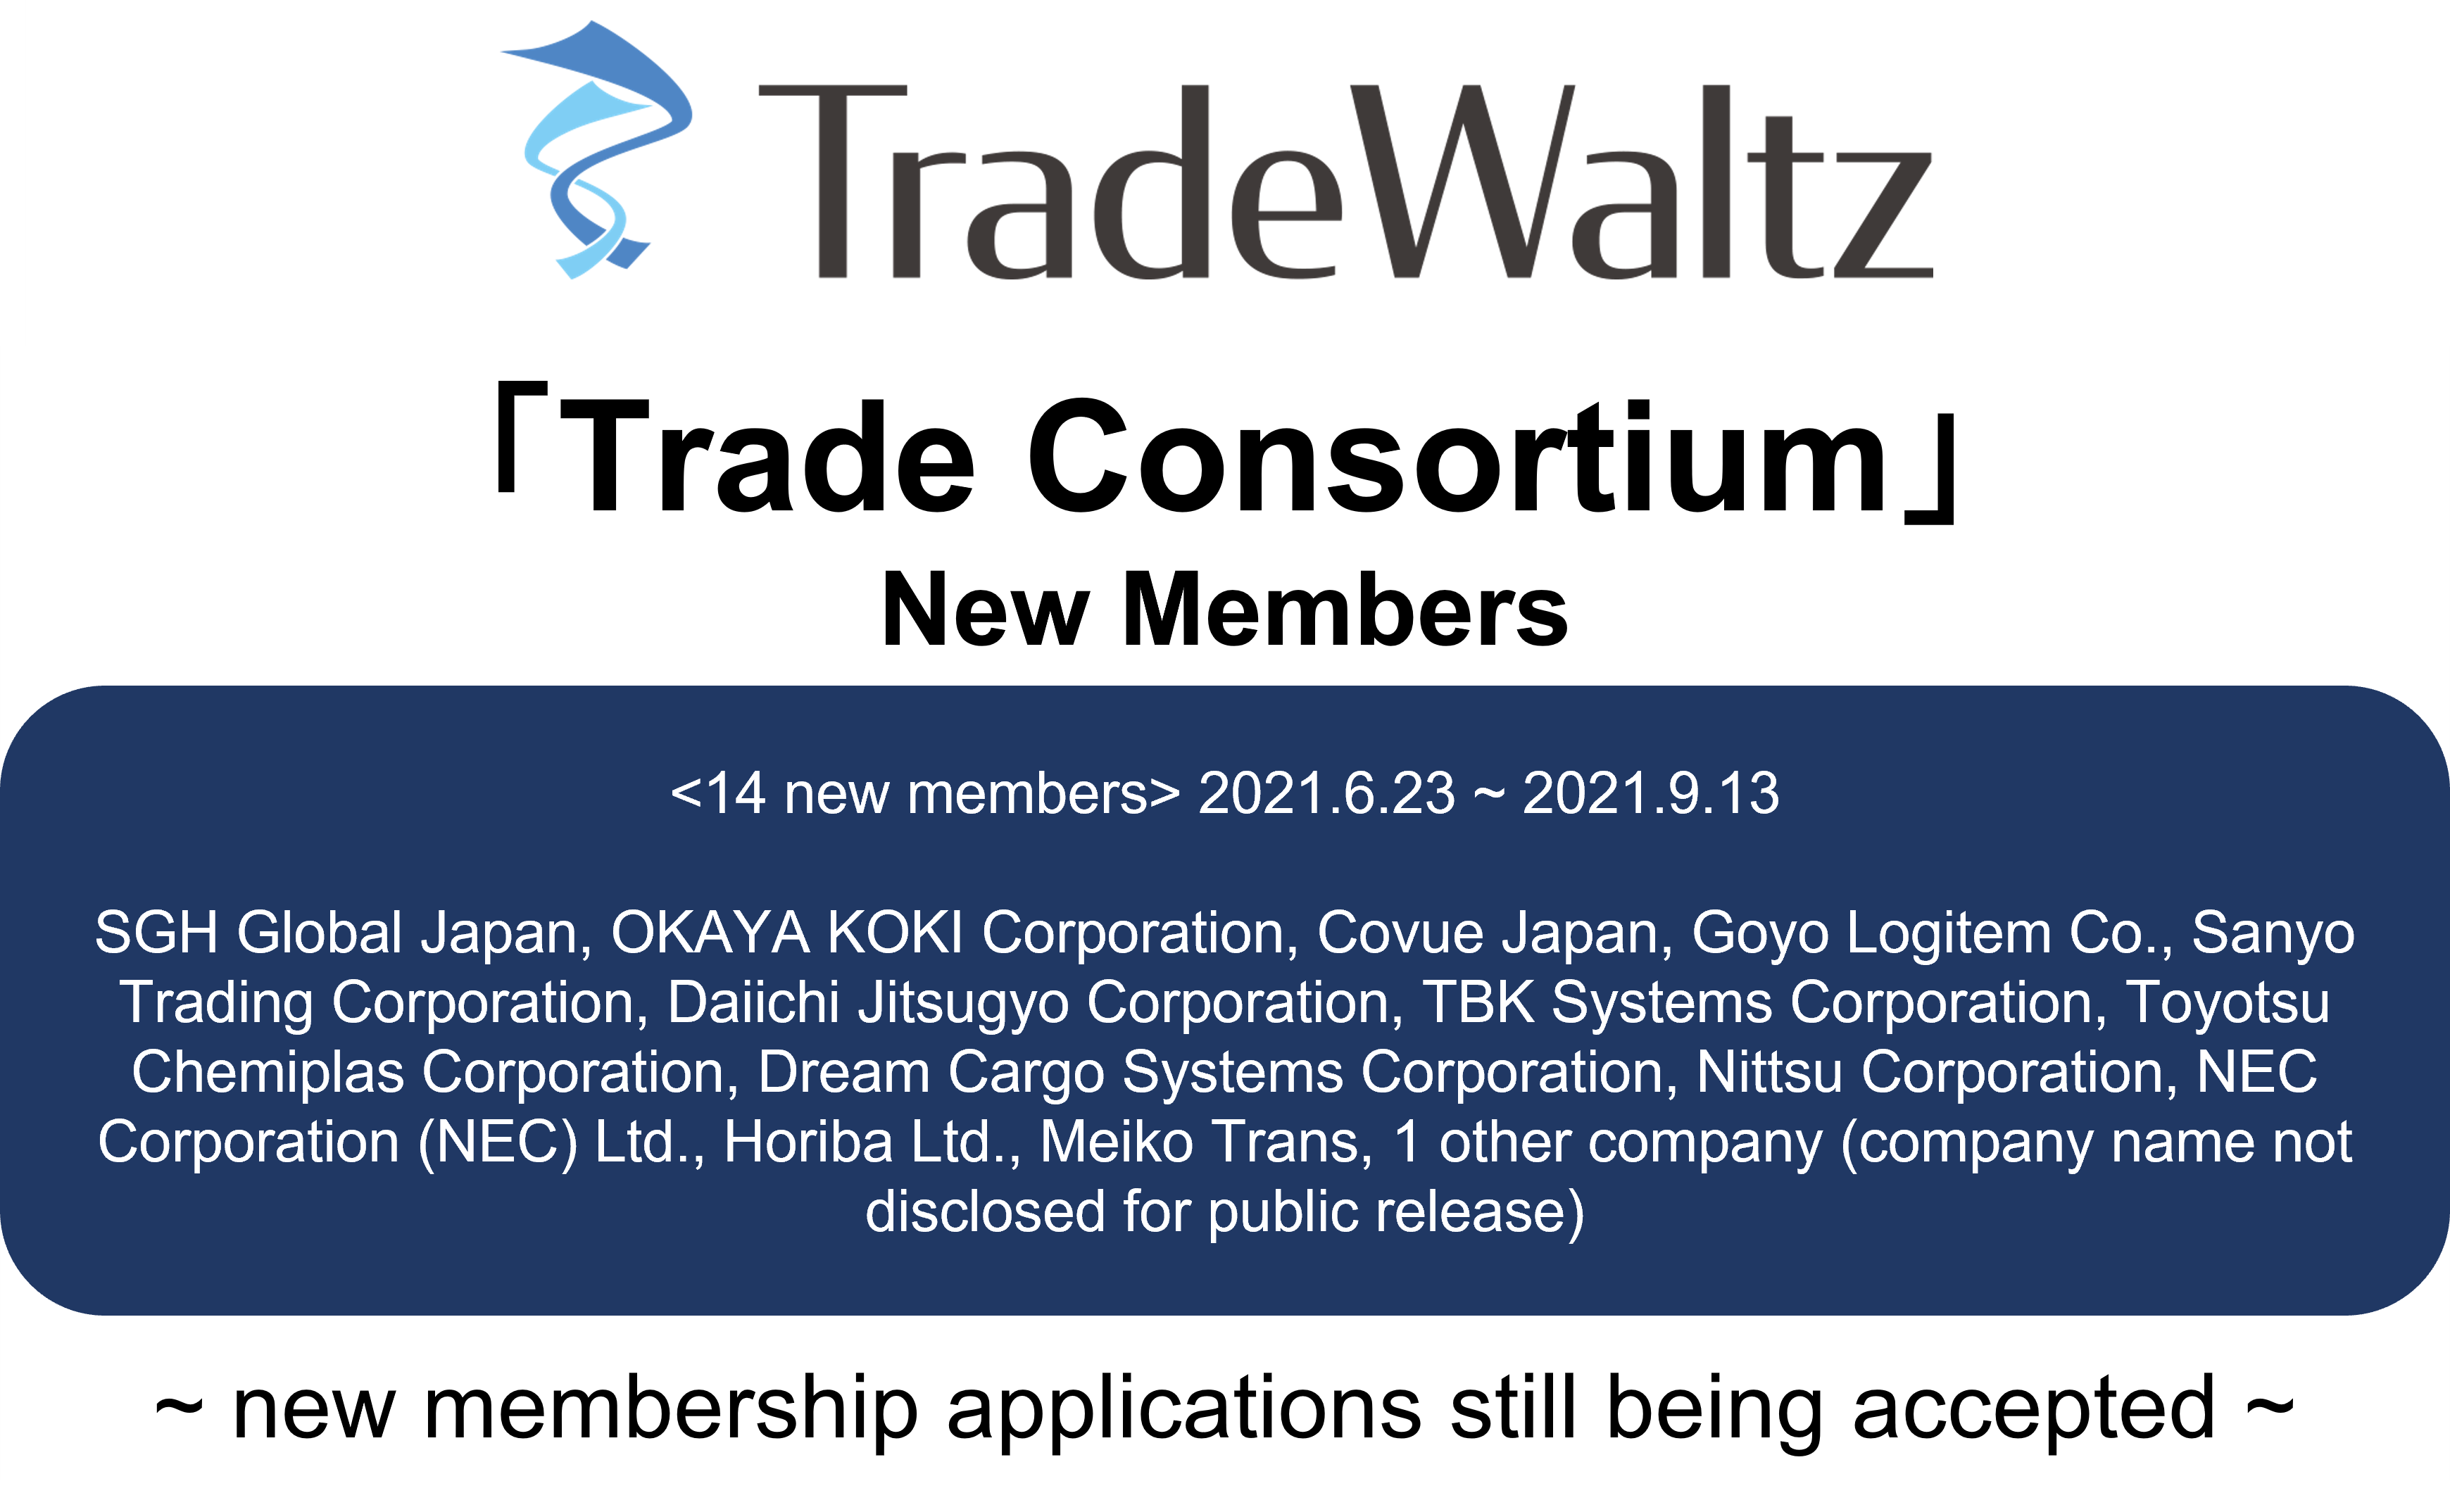 The “Trade Consortium,” for Which TradeWaltz Inc., a Trade Digital Transformation Promoter, Serves as the Secretariat, Has Expanded to a Total of 65 Companies. A Wide Range of Companies, Including Trading Companies, Manufacturers, and Logistics Companies, are Joining One After Another.